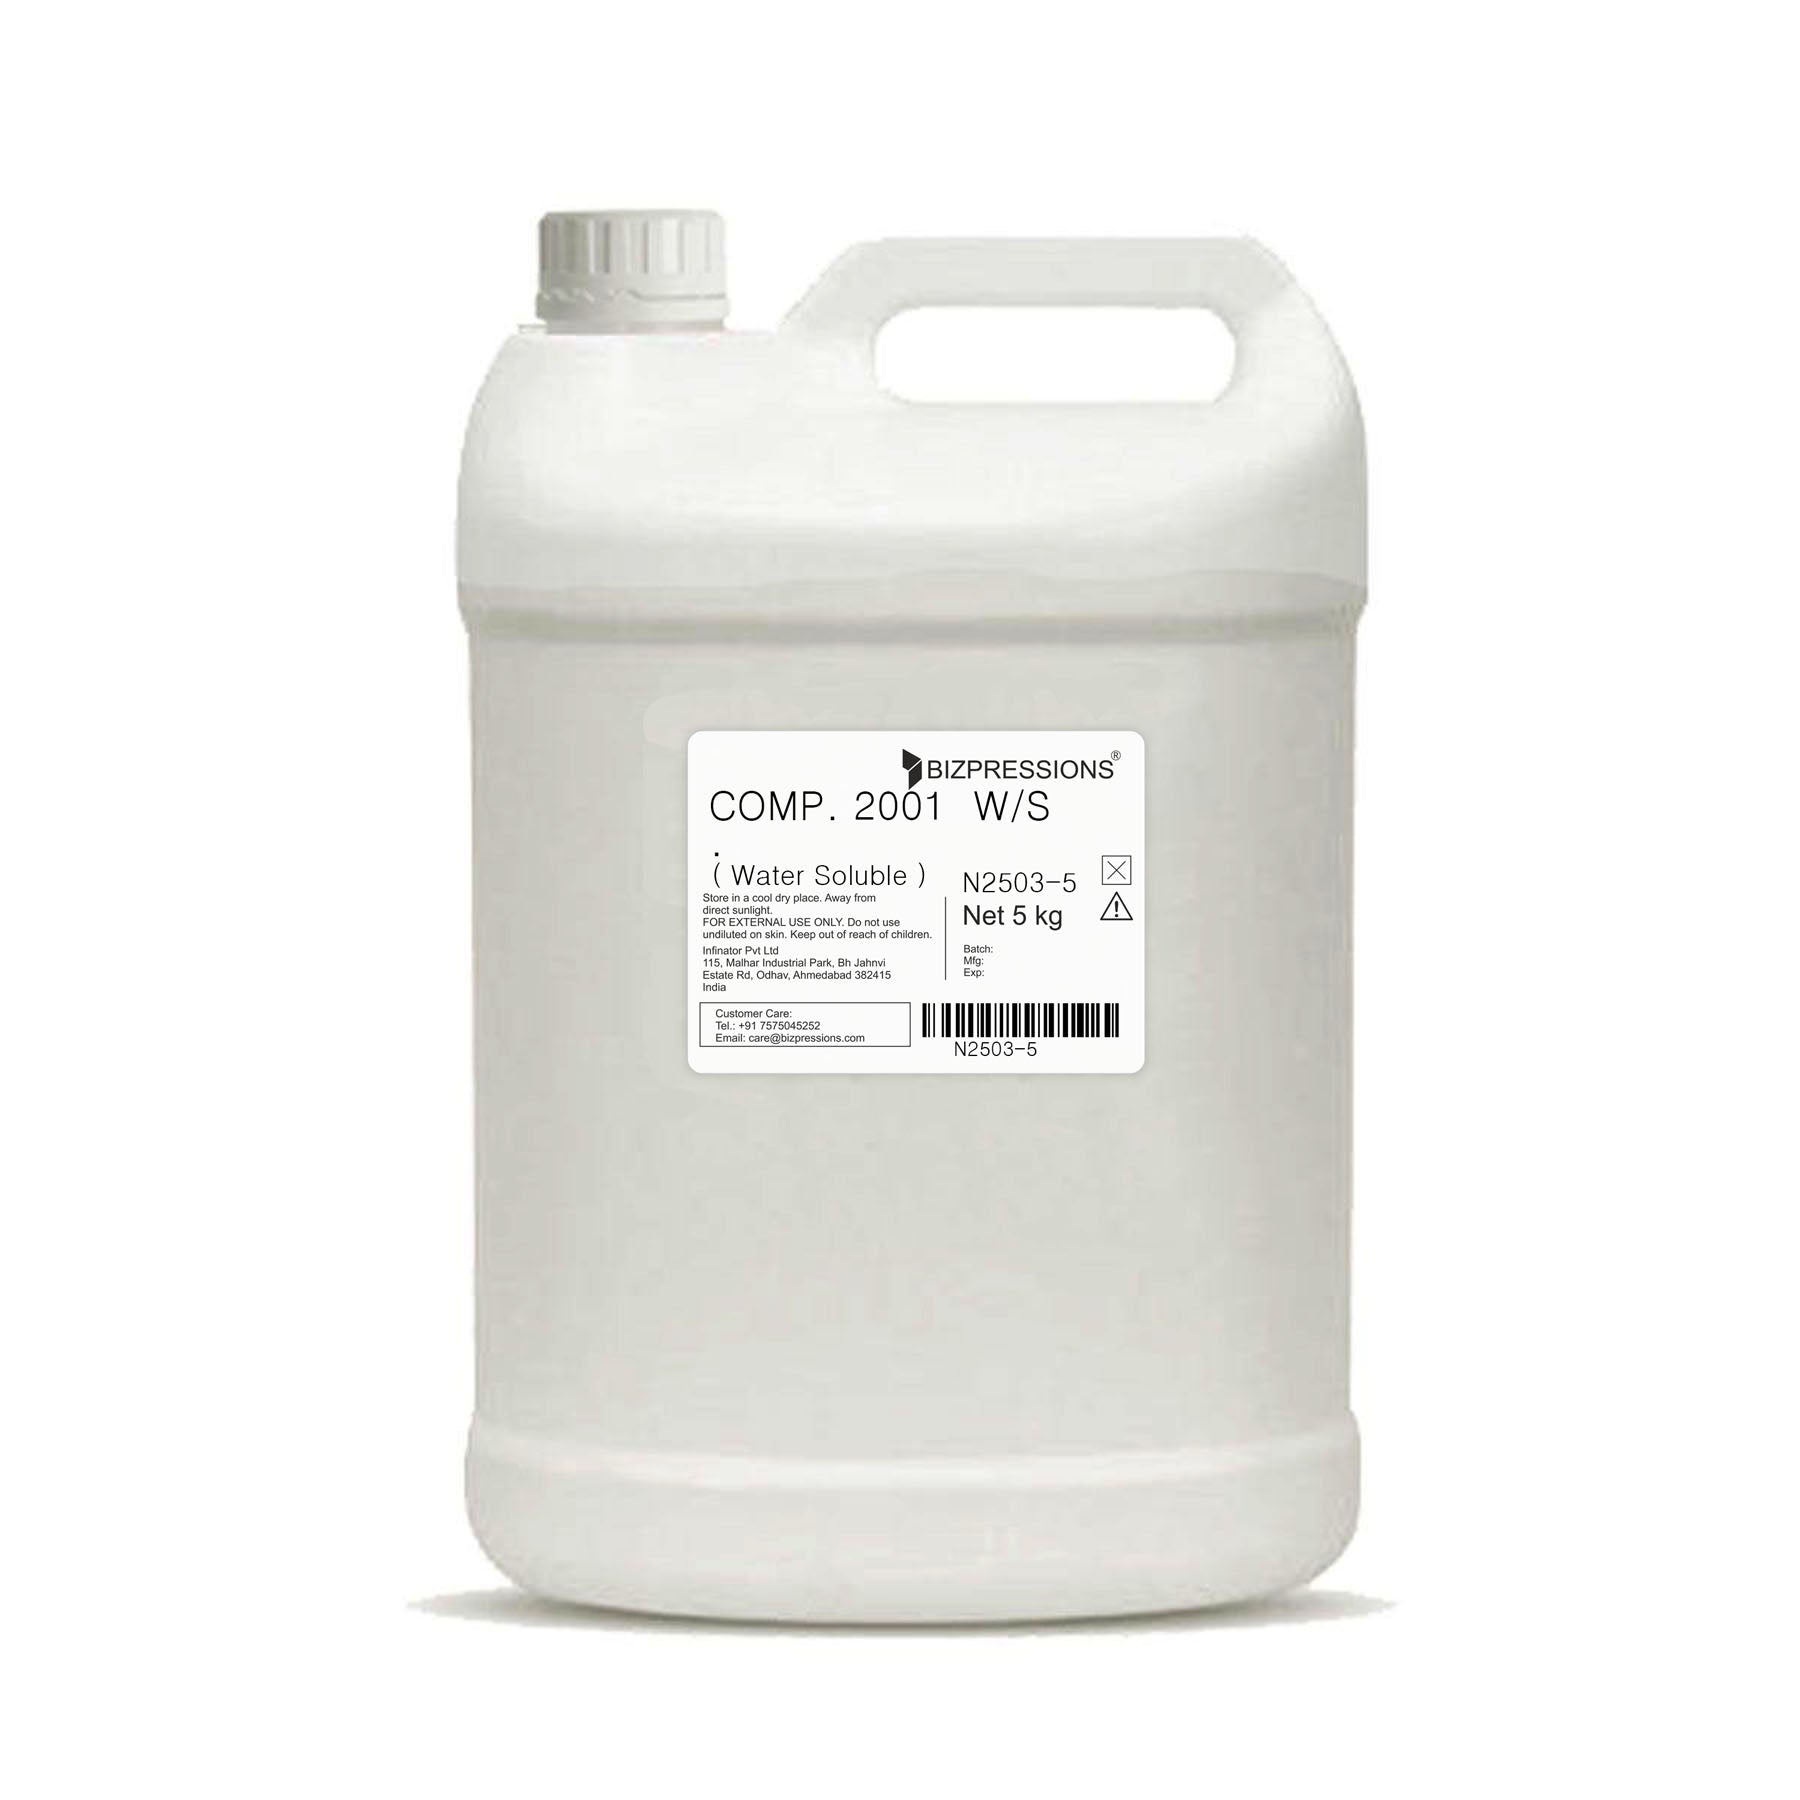 COMP 2001 W/S - Fragrance ( Water Soluble ) - 5 kg